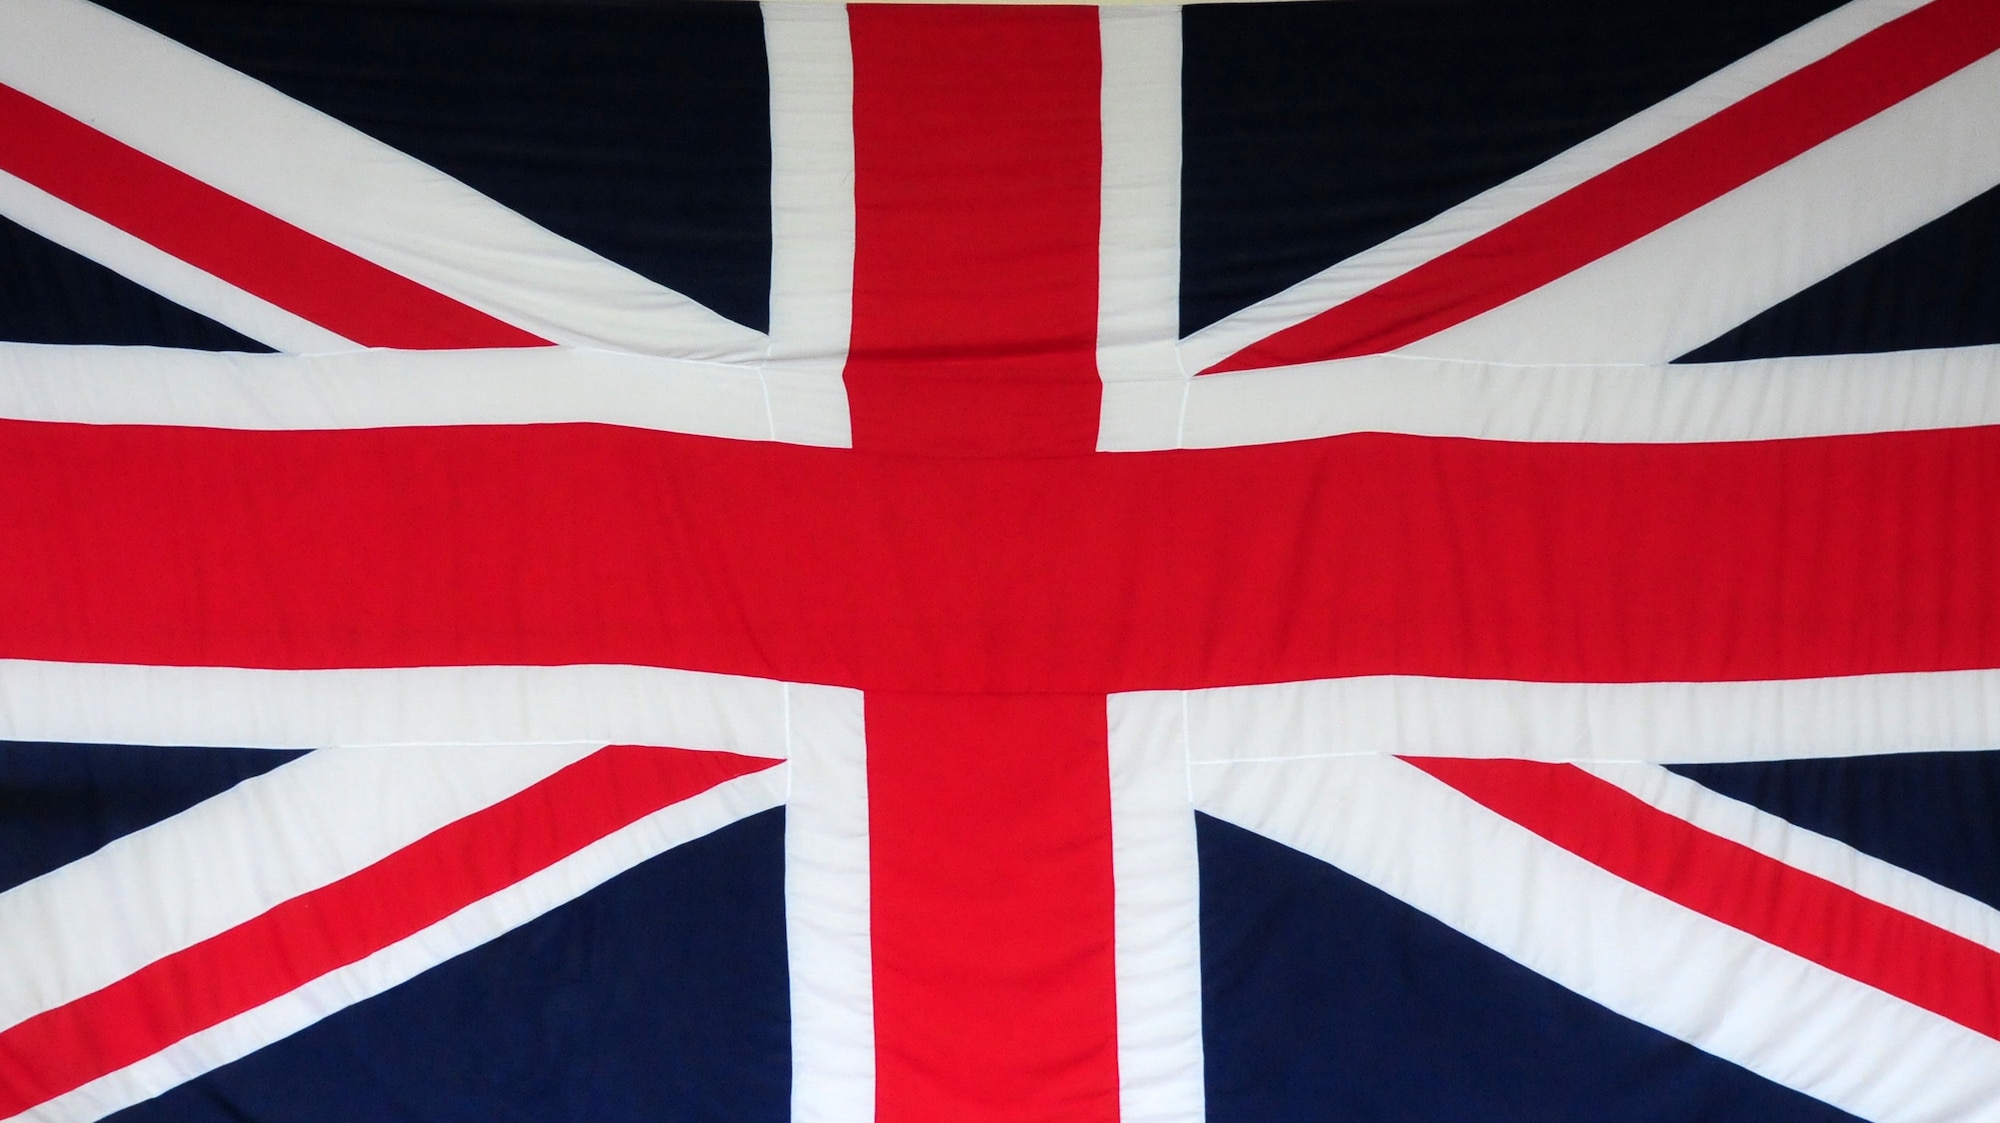 The striking red, white and blue design of the Union Flag today harks back to a time when “Britannia ruled the waves”.While the flag appears symmetrical, the white lines above and below the diagonal red are different widths. On the side closest to the flagpole (or on the left when depicted on paper), the white lines above the diagonals are wider; on the side furthest from the flagpole (or on the right when depicted on paper), the converse is true. Thus, rotating the flag 180 degrees will have no change but, if mirrored, the flag will be upside-down.
Placing the flag upside down is considered an offence against the dignity of the reigning sovereign.(U.S. Air Force photo by A1C Lausanne Morgan)